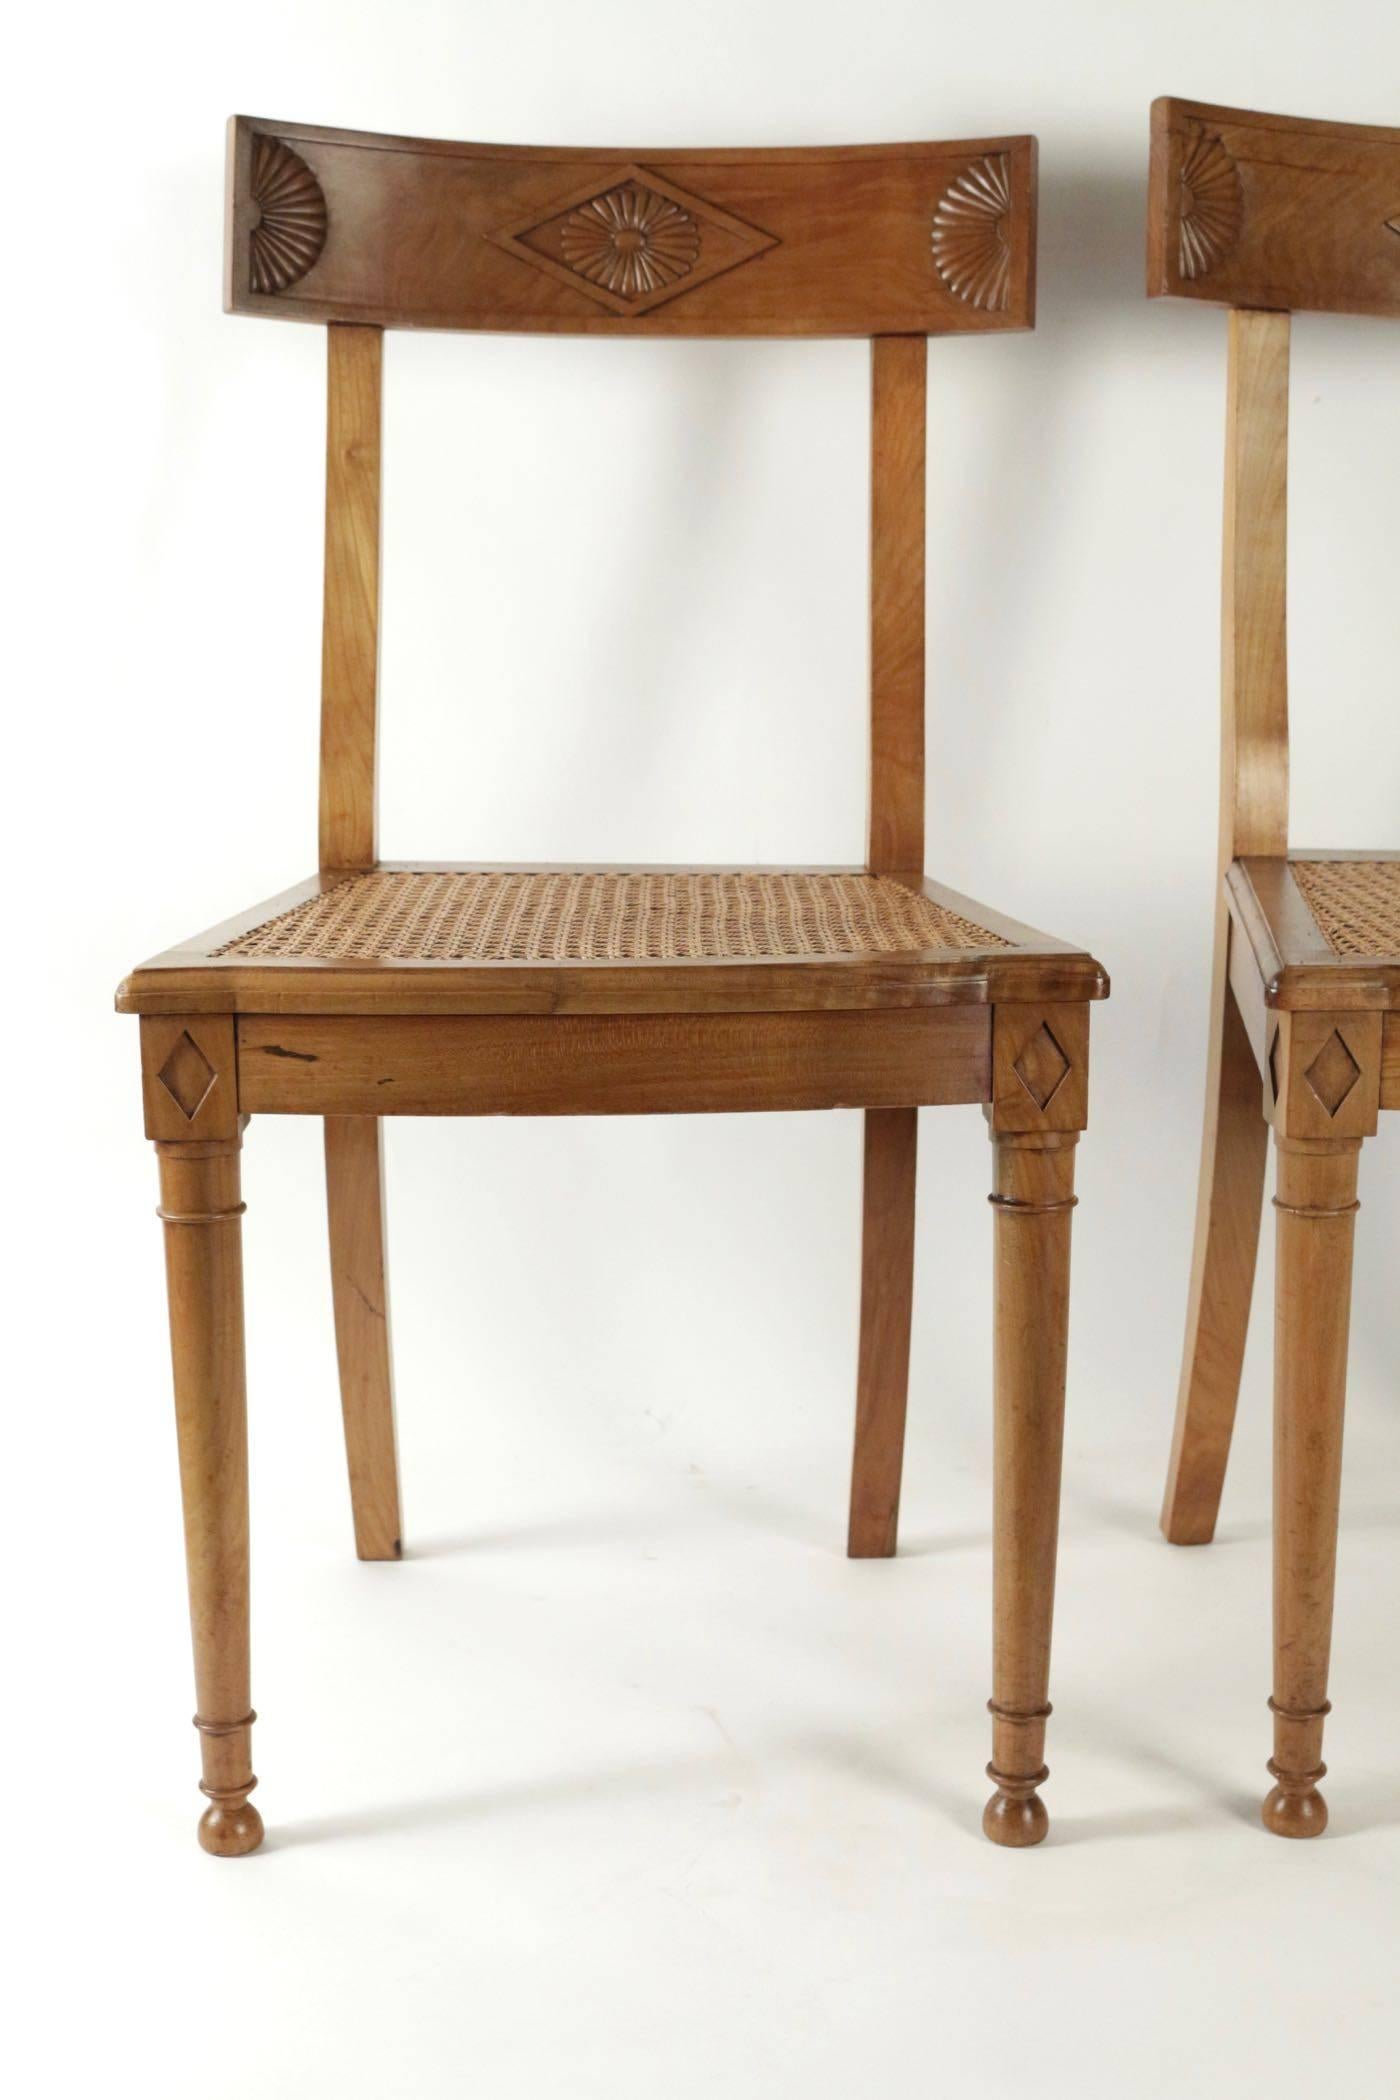 Pair of caned seat chairs from the restoration period 19th century.
Measures: H 84cm, L 45cm, P 38cm.
 